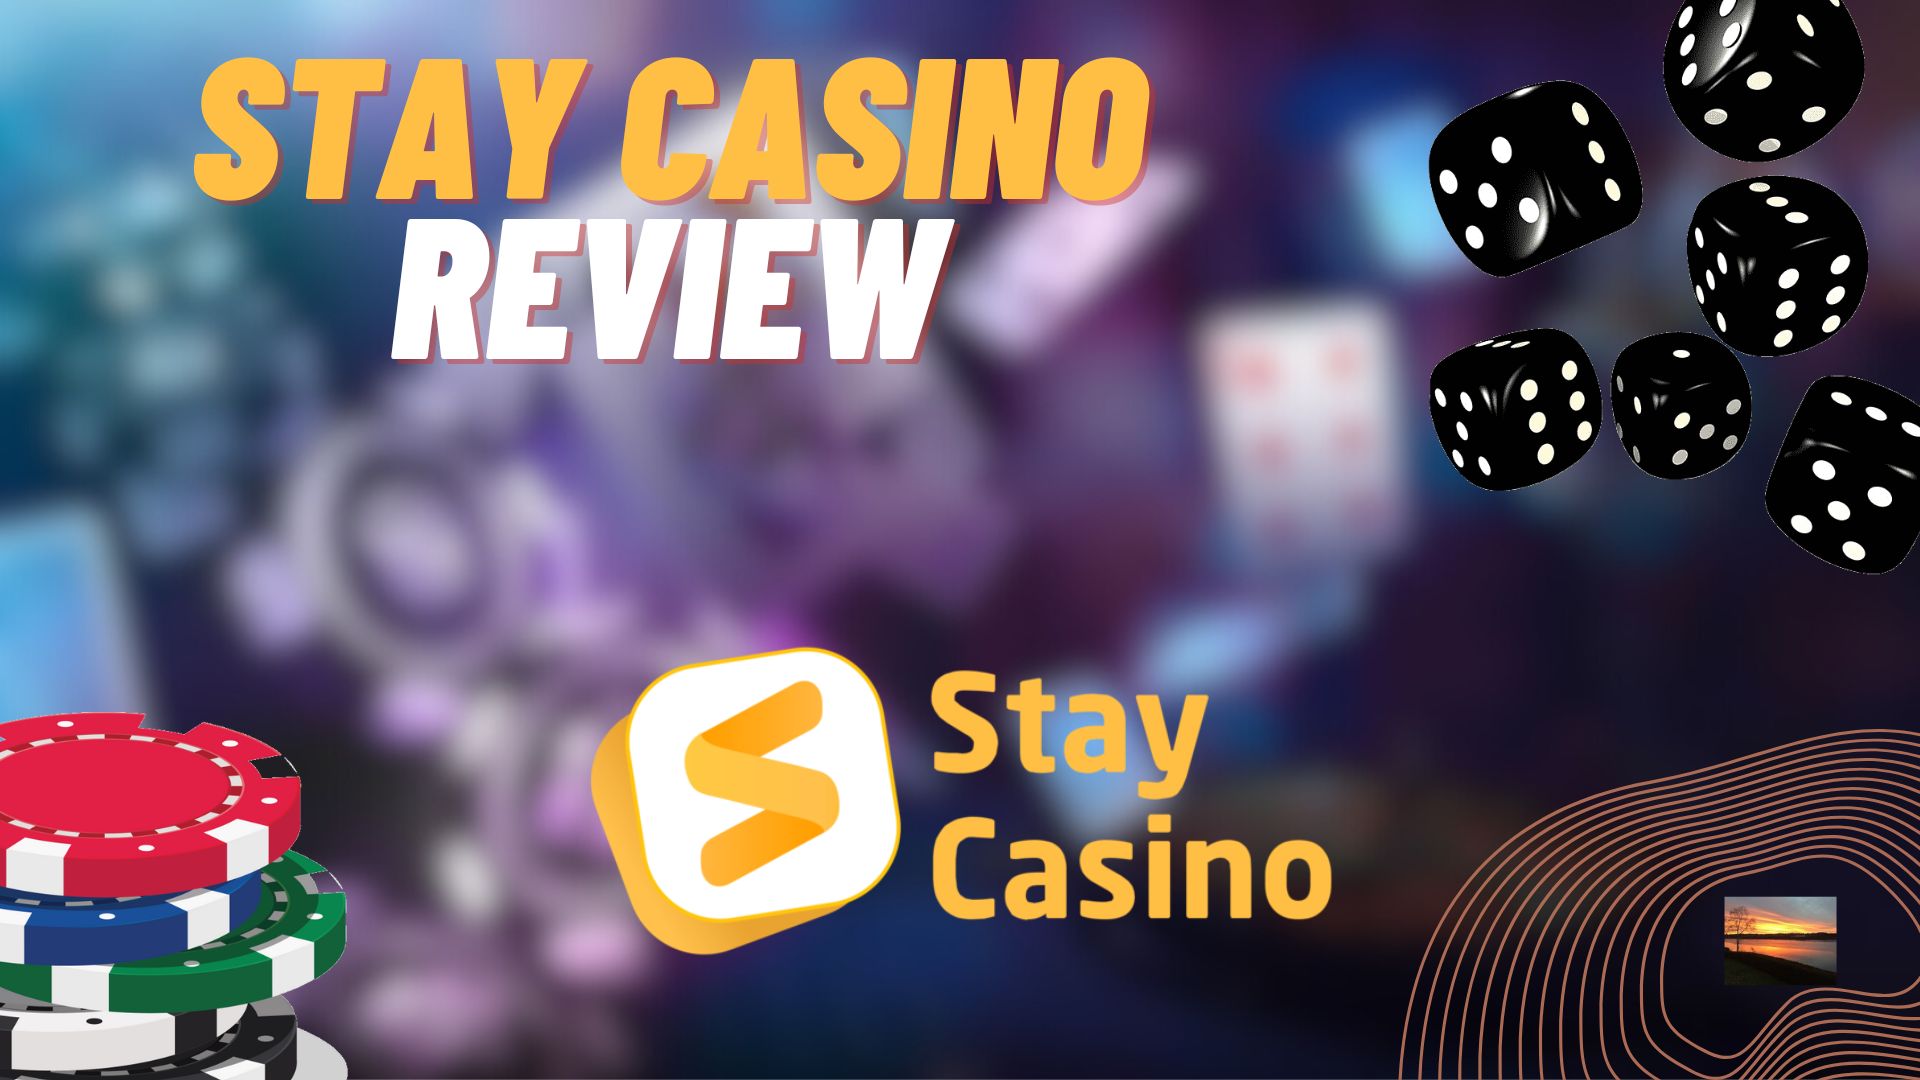 Review of the Stay Casino